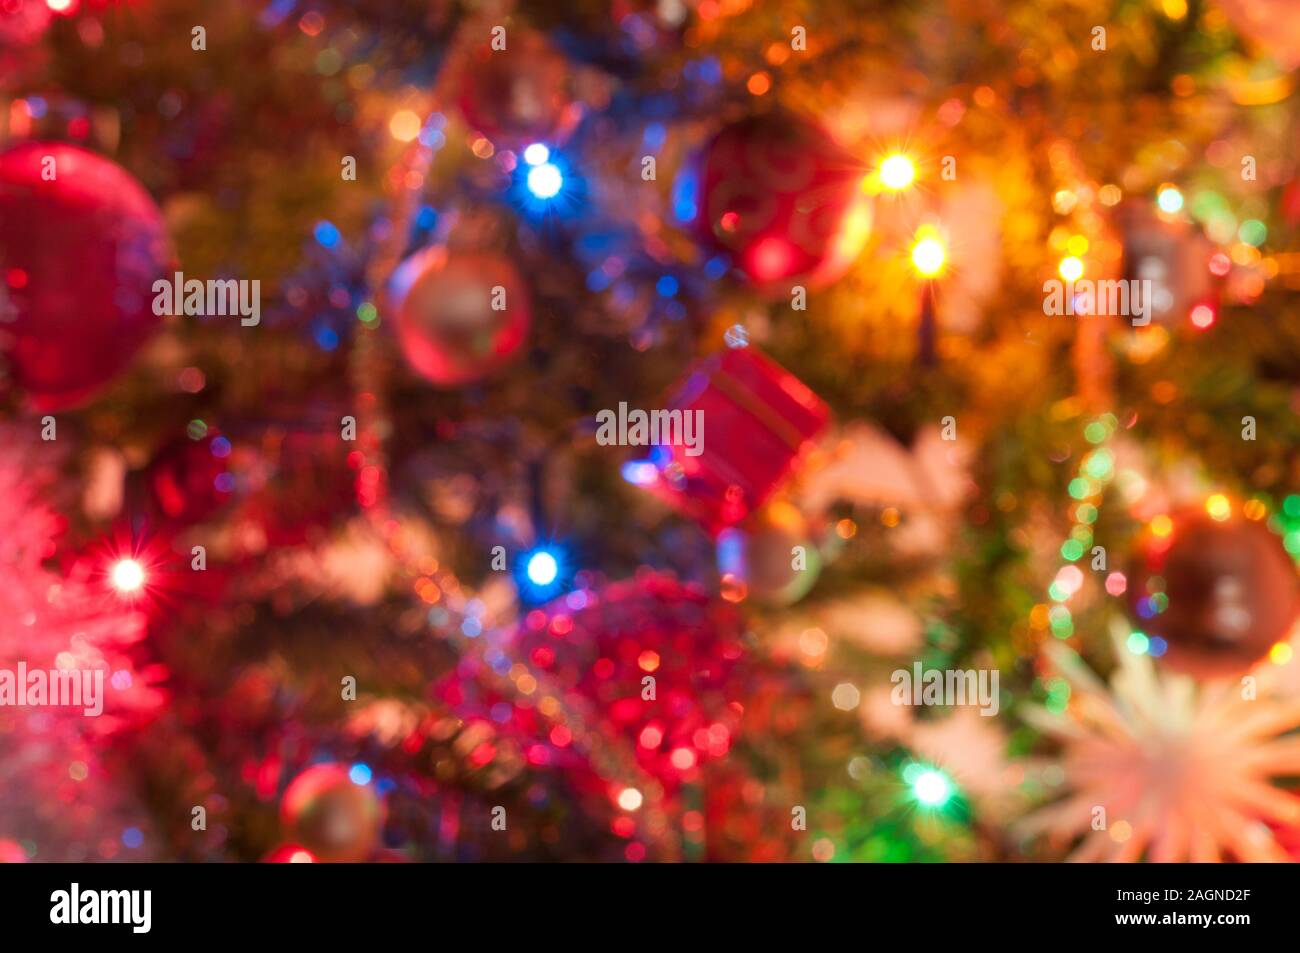 out of focus christmas tree decoration background idea concept Stock Photo